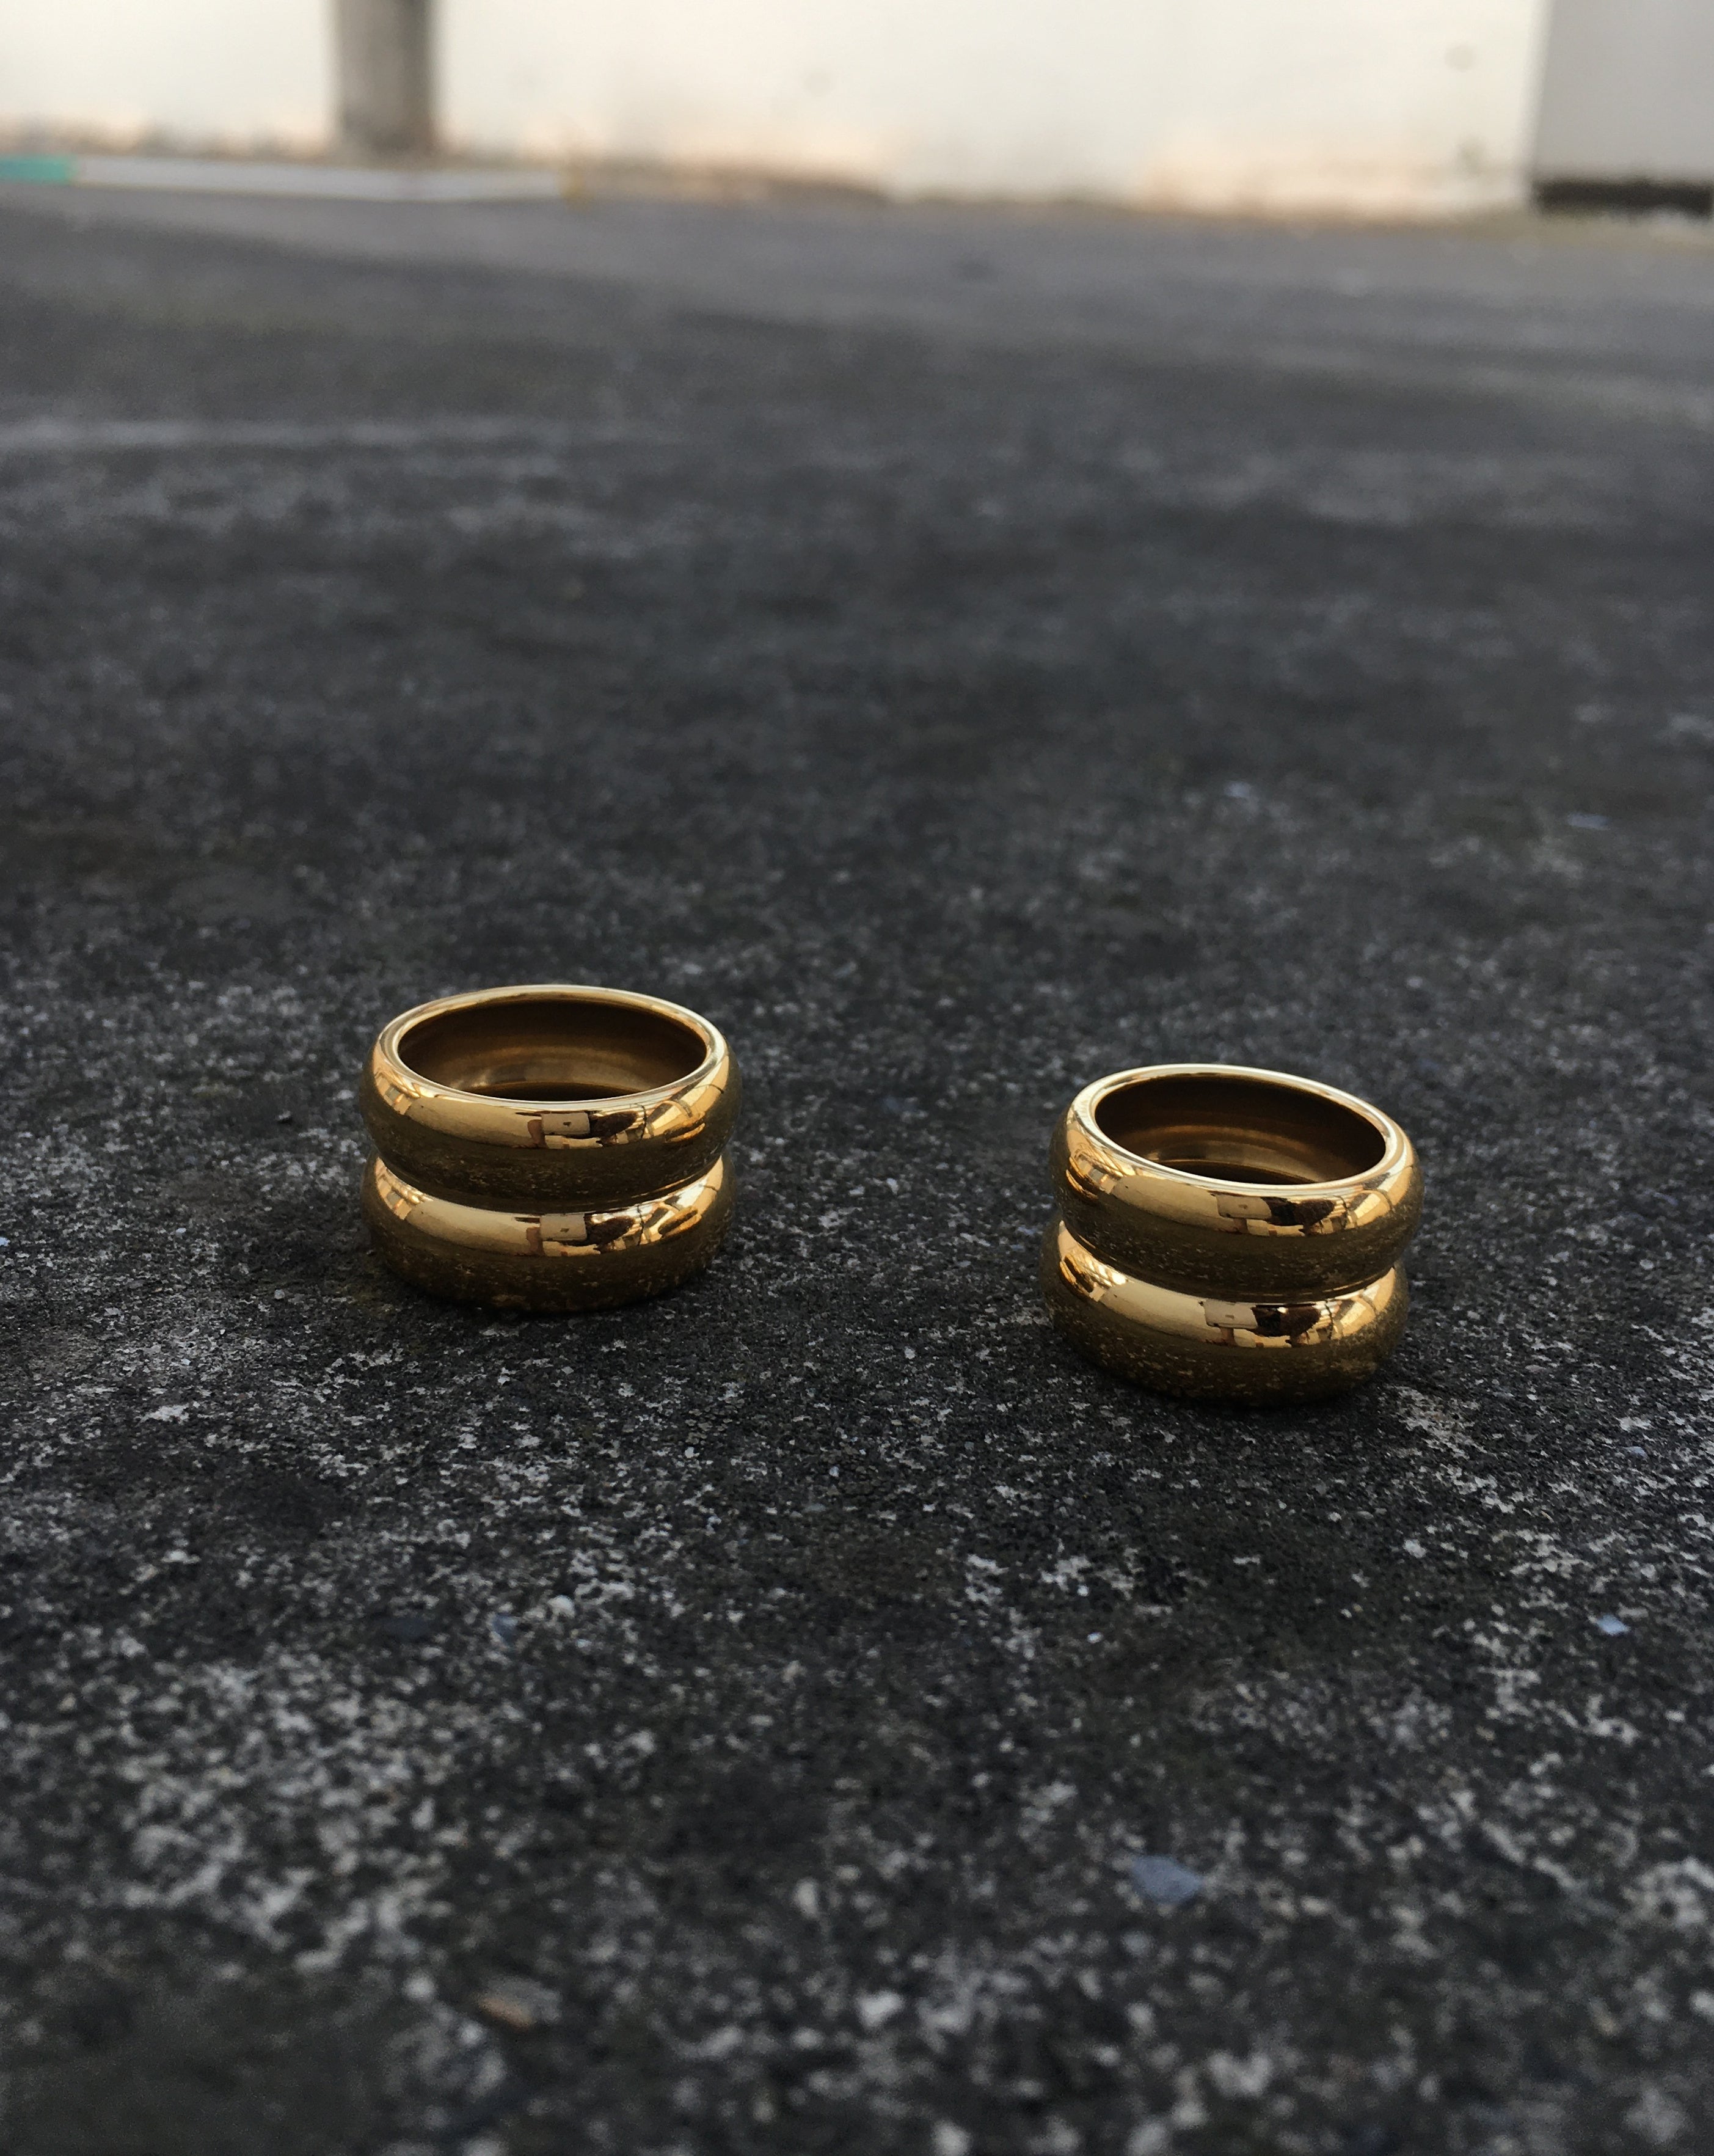 Gold duo band rings